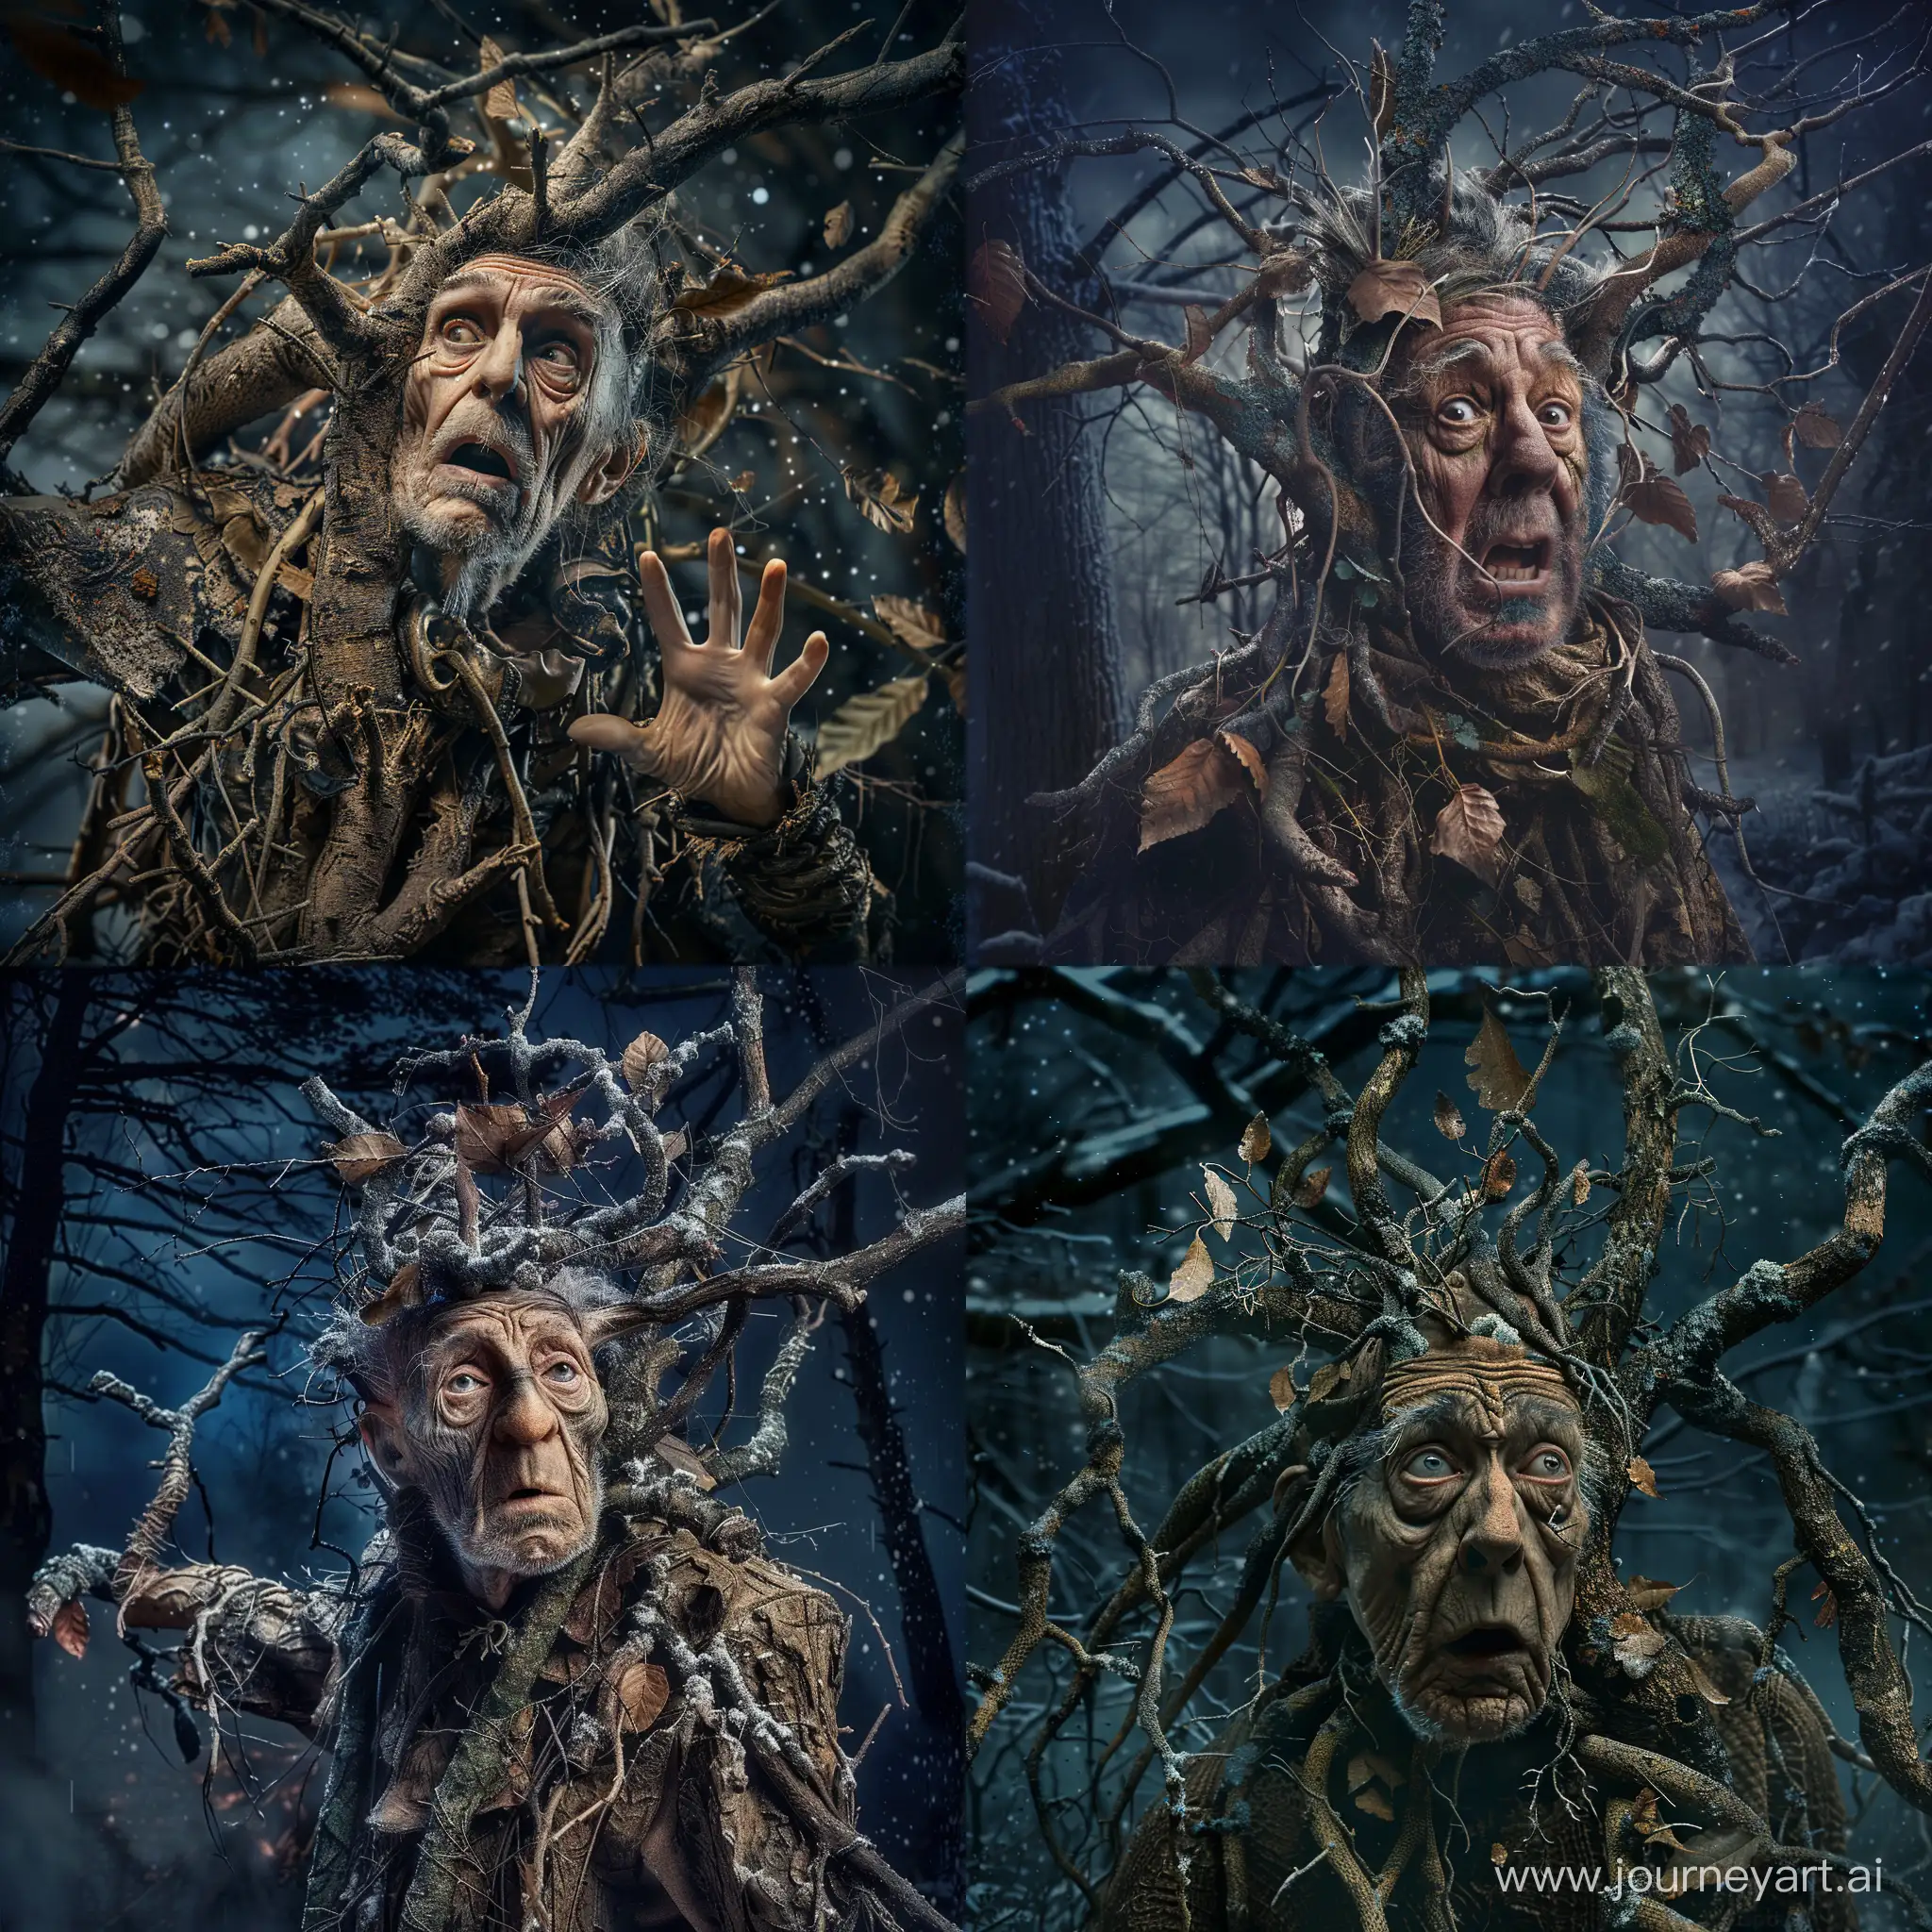 Elderly-Man-Enchanted-into-a-Tree-in-Haunting-Forest